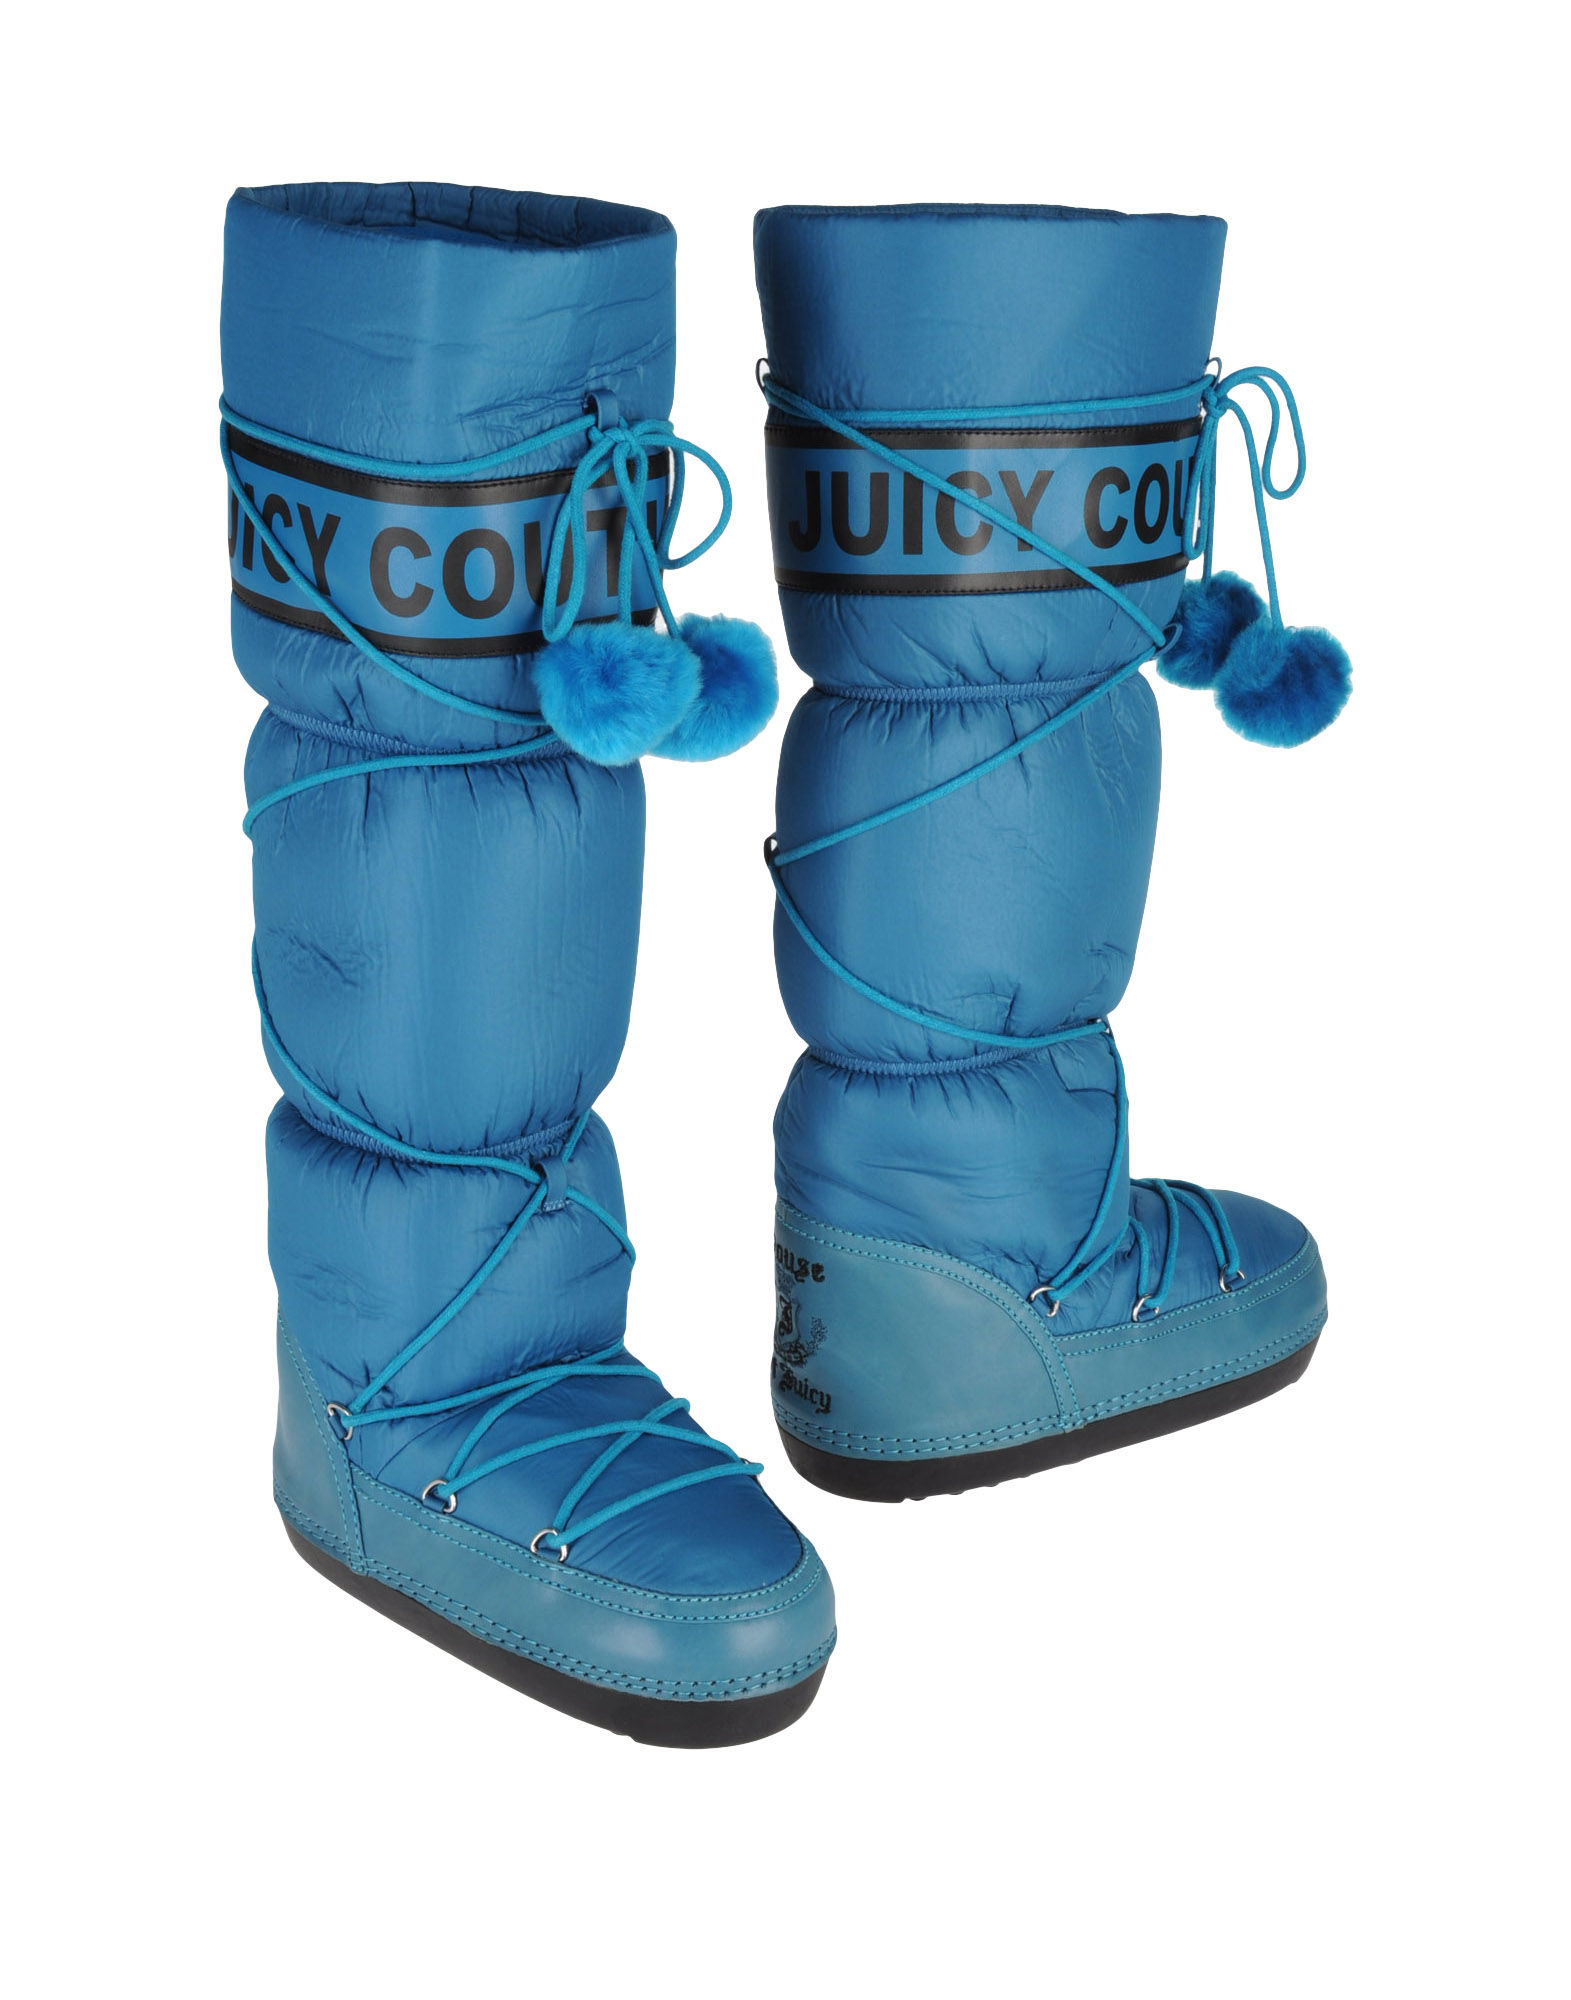 Juicy Couture Boots in Blue Lyst